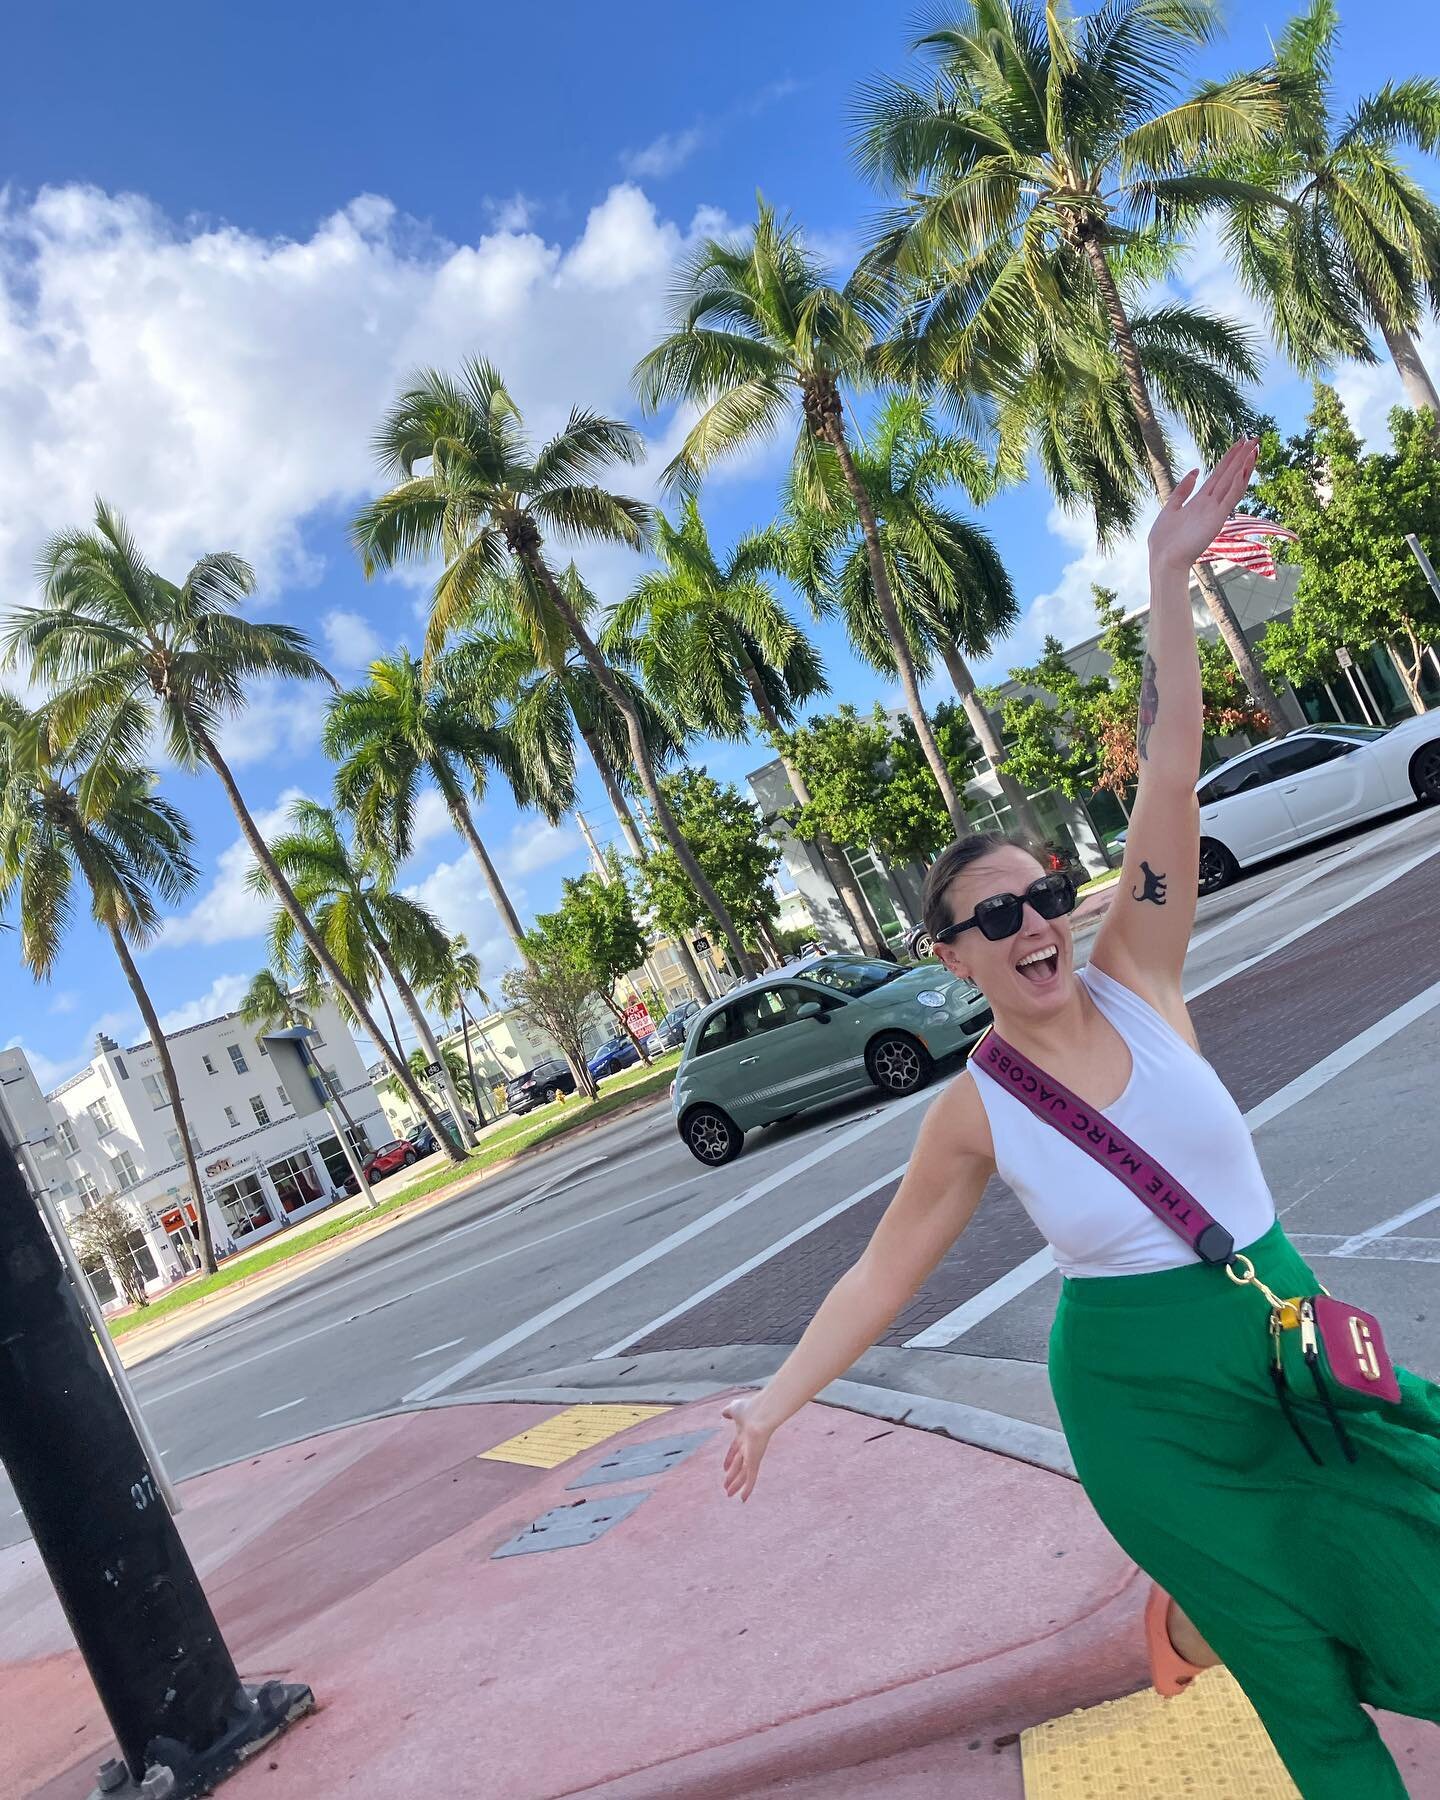 If you thought I sung &ldquo;welcome to Miami, bienvenidos a Miami&rdquo; the entire time I was here, even when it was pissing out of the heavens, then you would be absolutely correct🤣